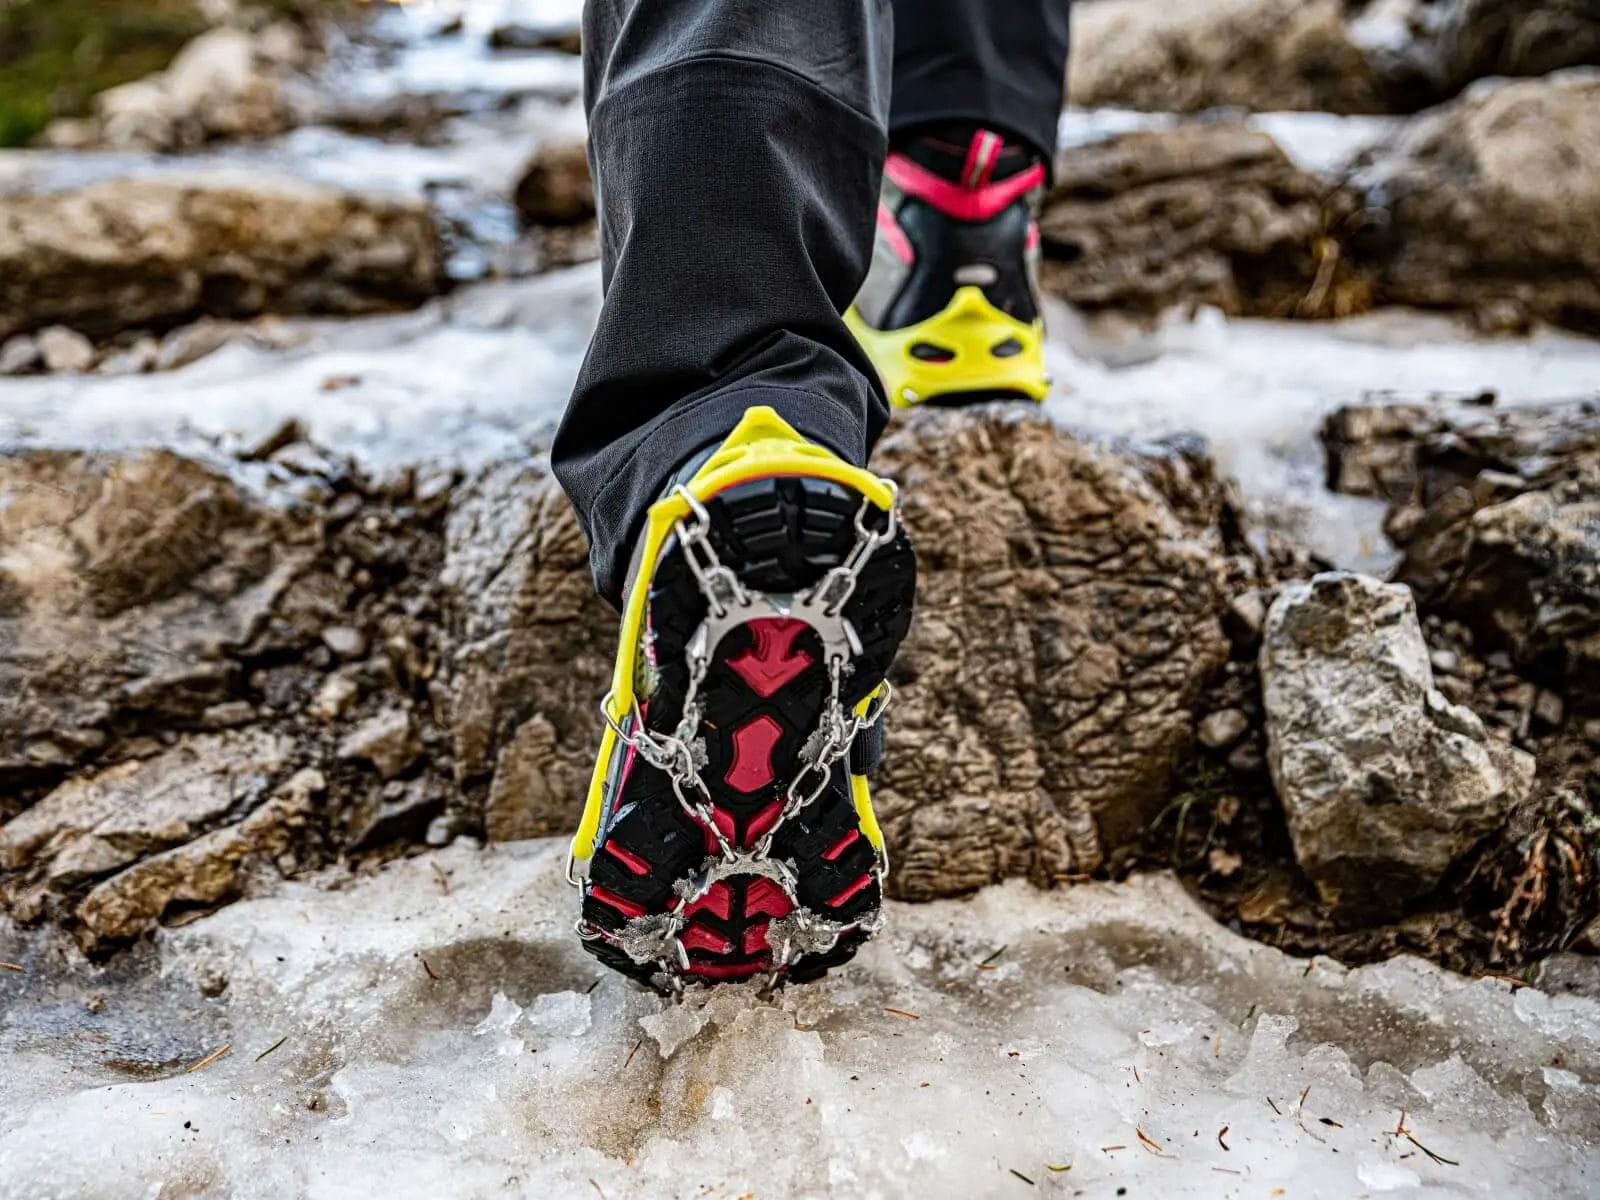 Ice Claw crampons anti-antideslizante-klettergreifer zapato cubiertas Spike Cleats v7q6 